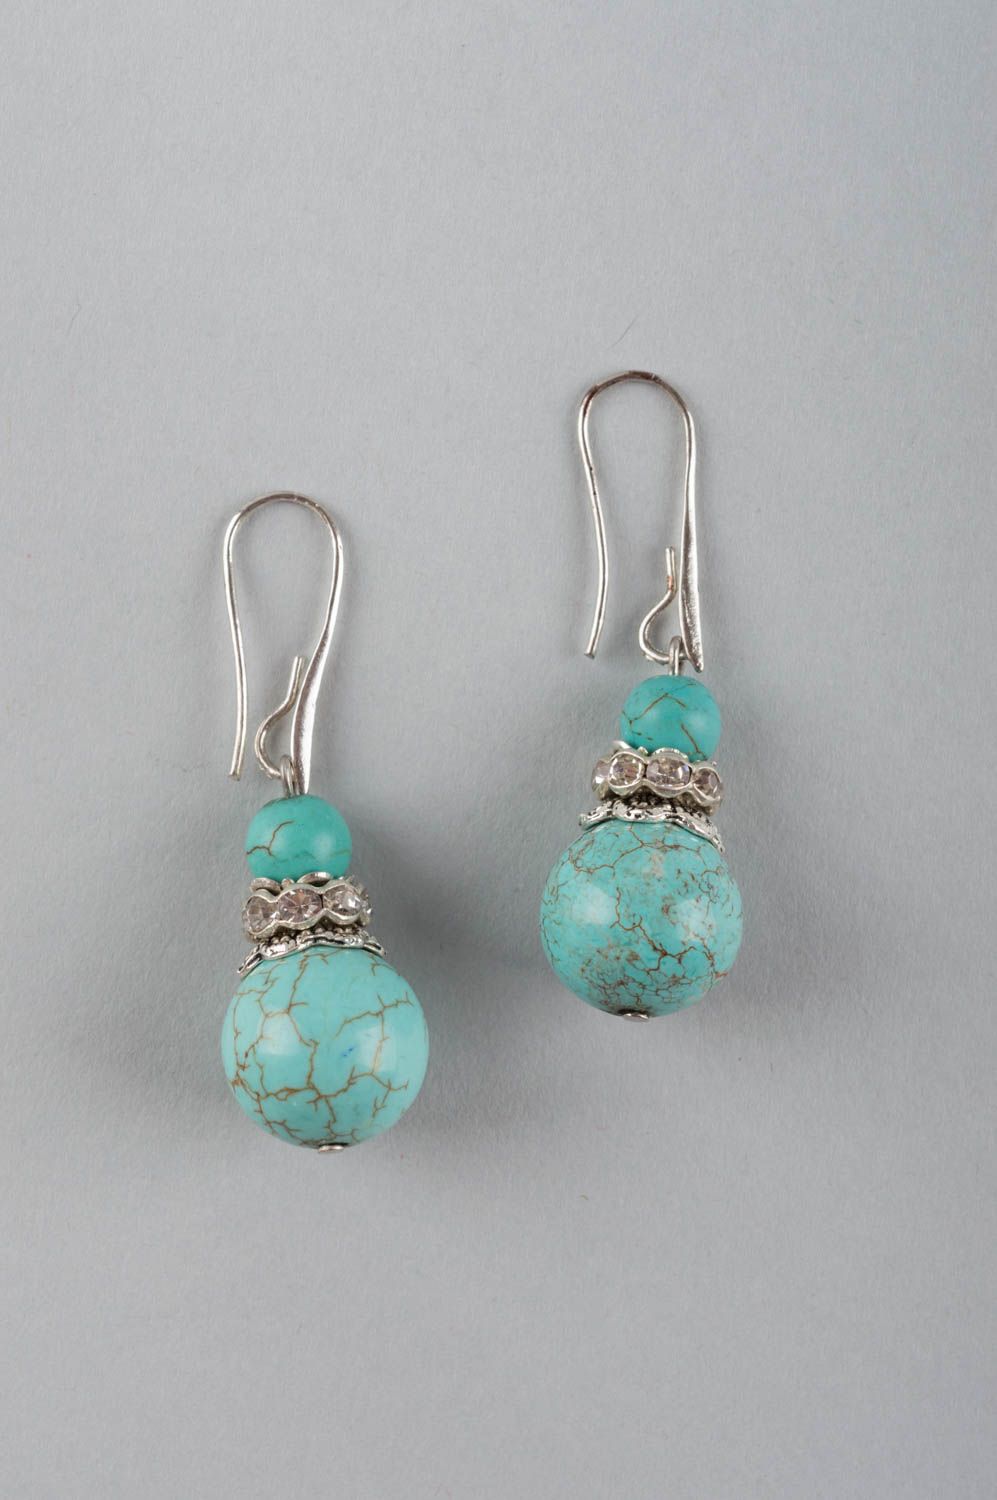 Unusual handmade designer brass earrings with natural turquoise stone beads photo 2